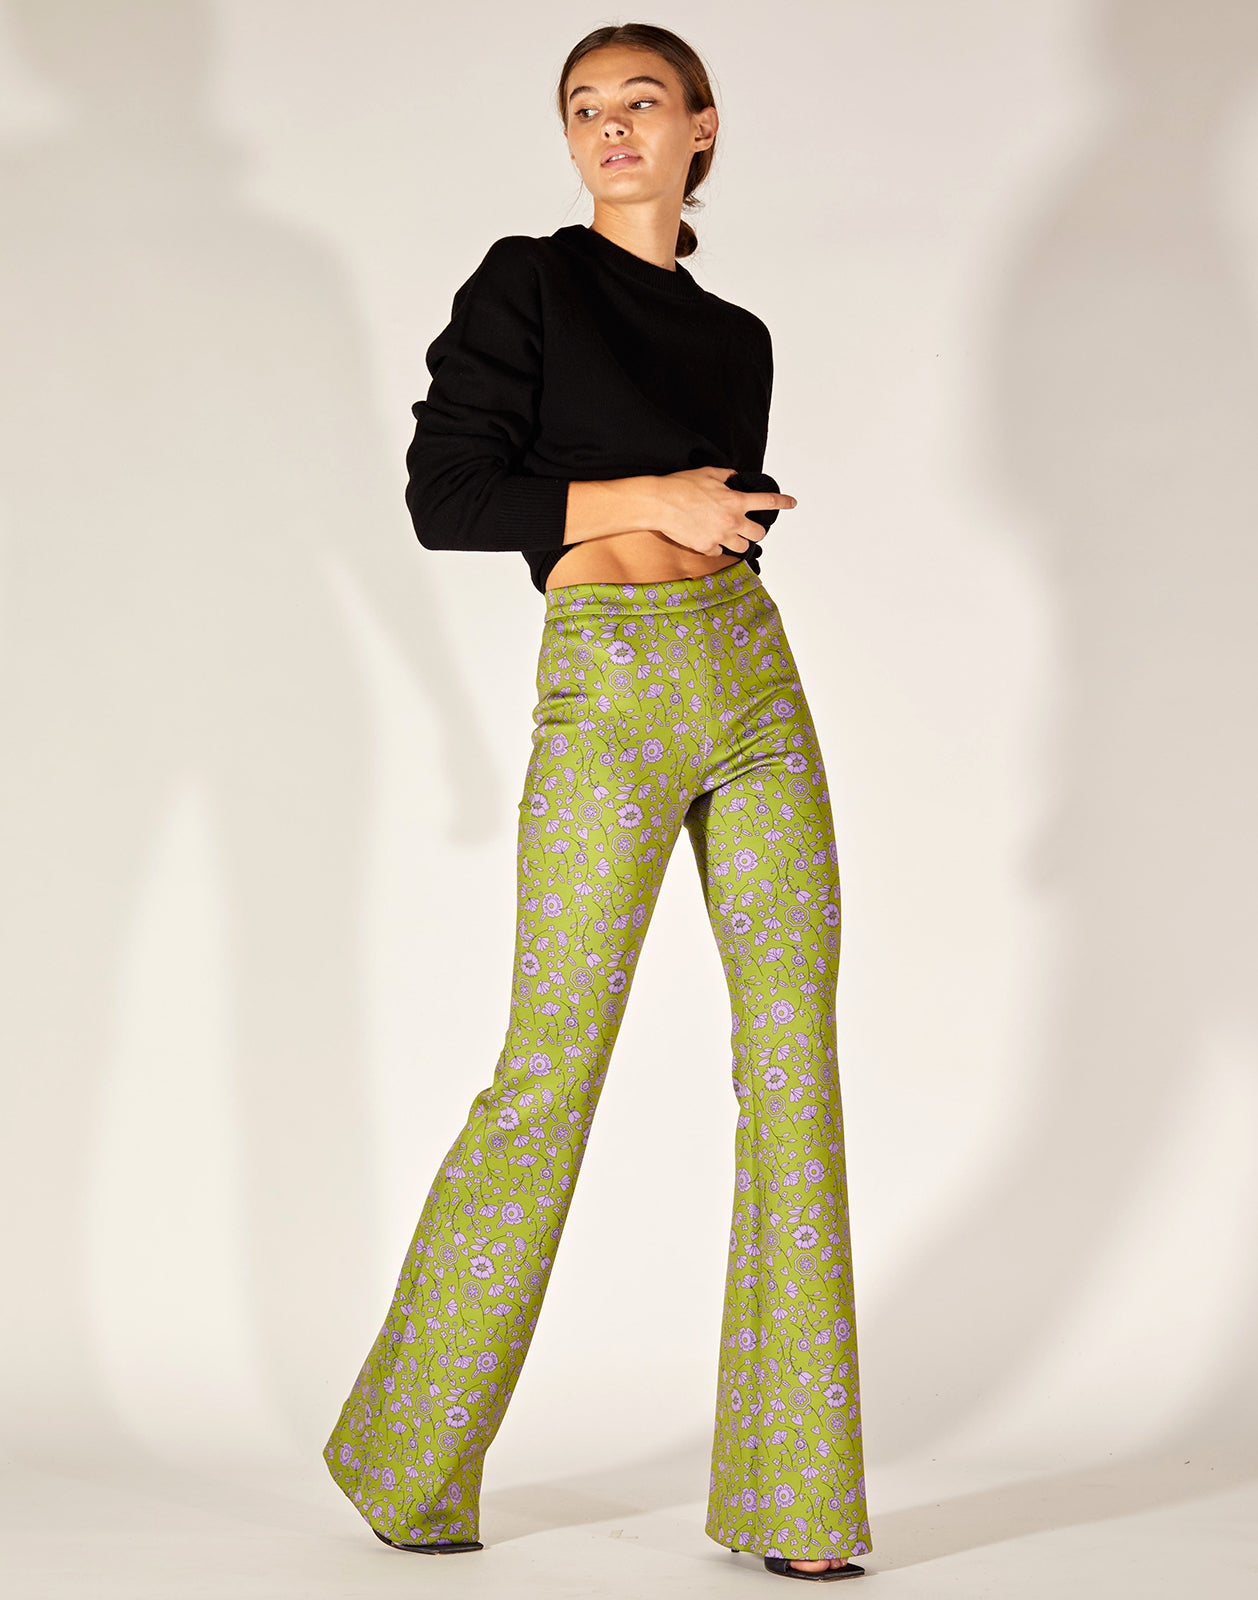 Cynthia Rowley Black Lace Bonded Fit and Flare Pant - Black Lace | Verishop